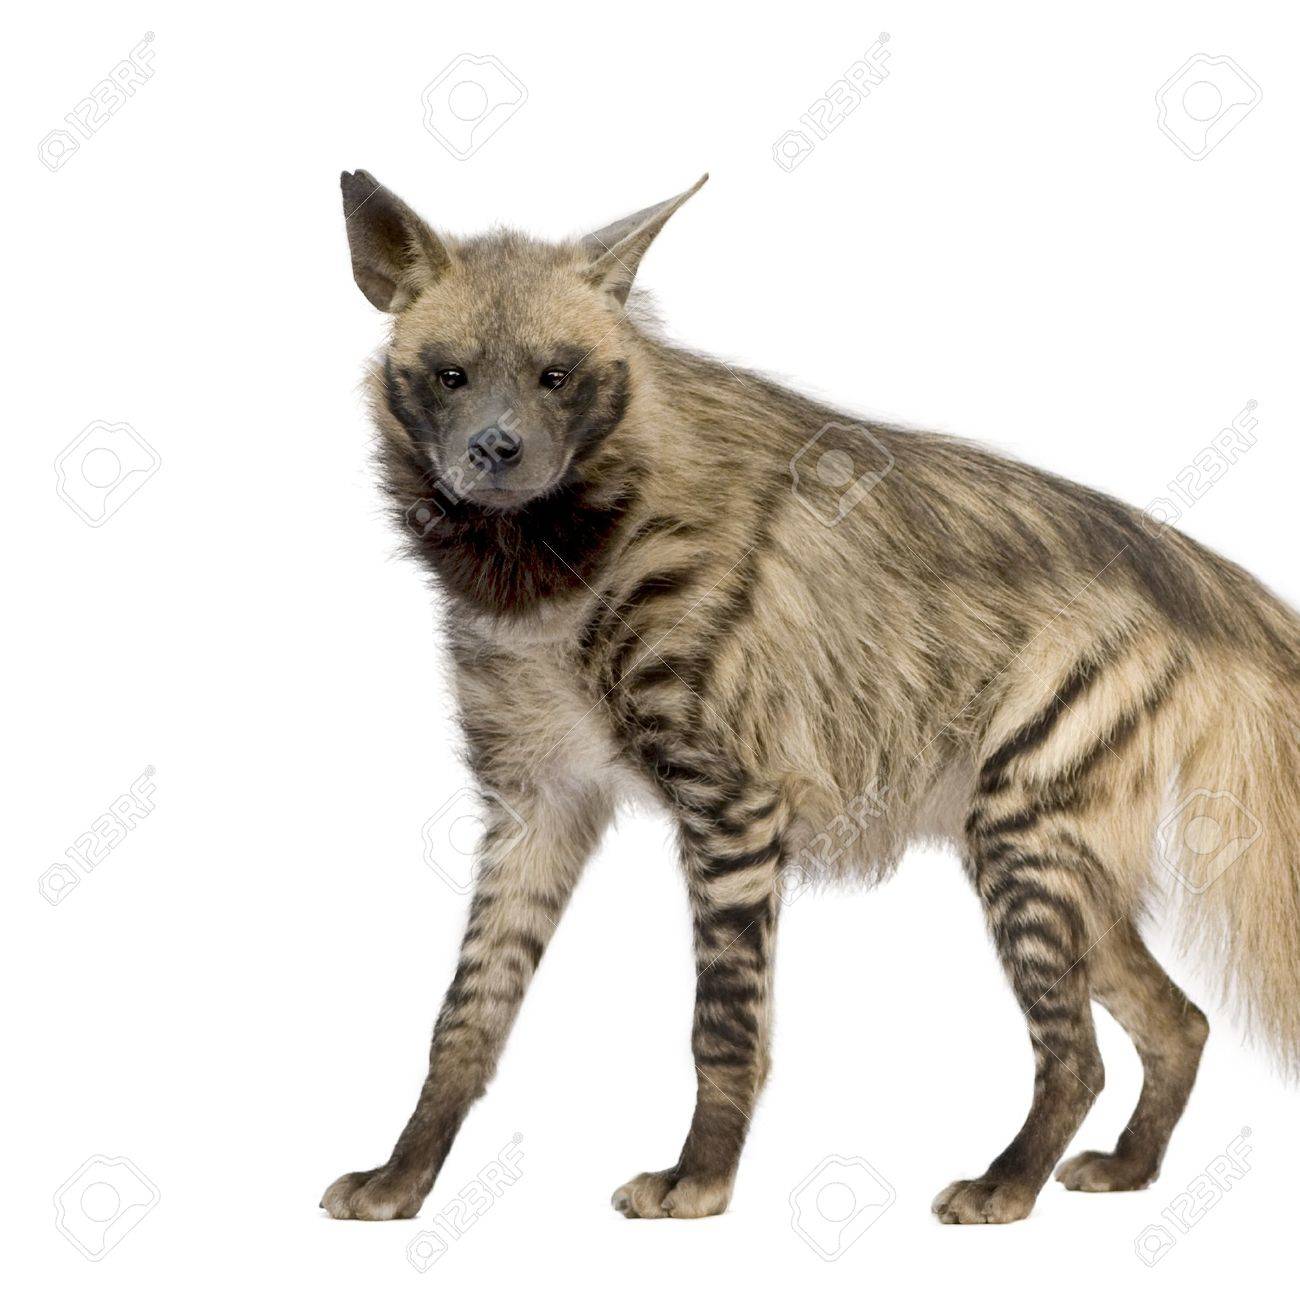 Striped Hyena In Front Of A White Background Stock Photo Picture